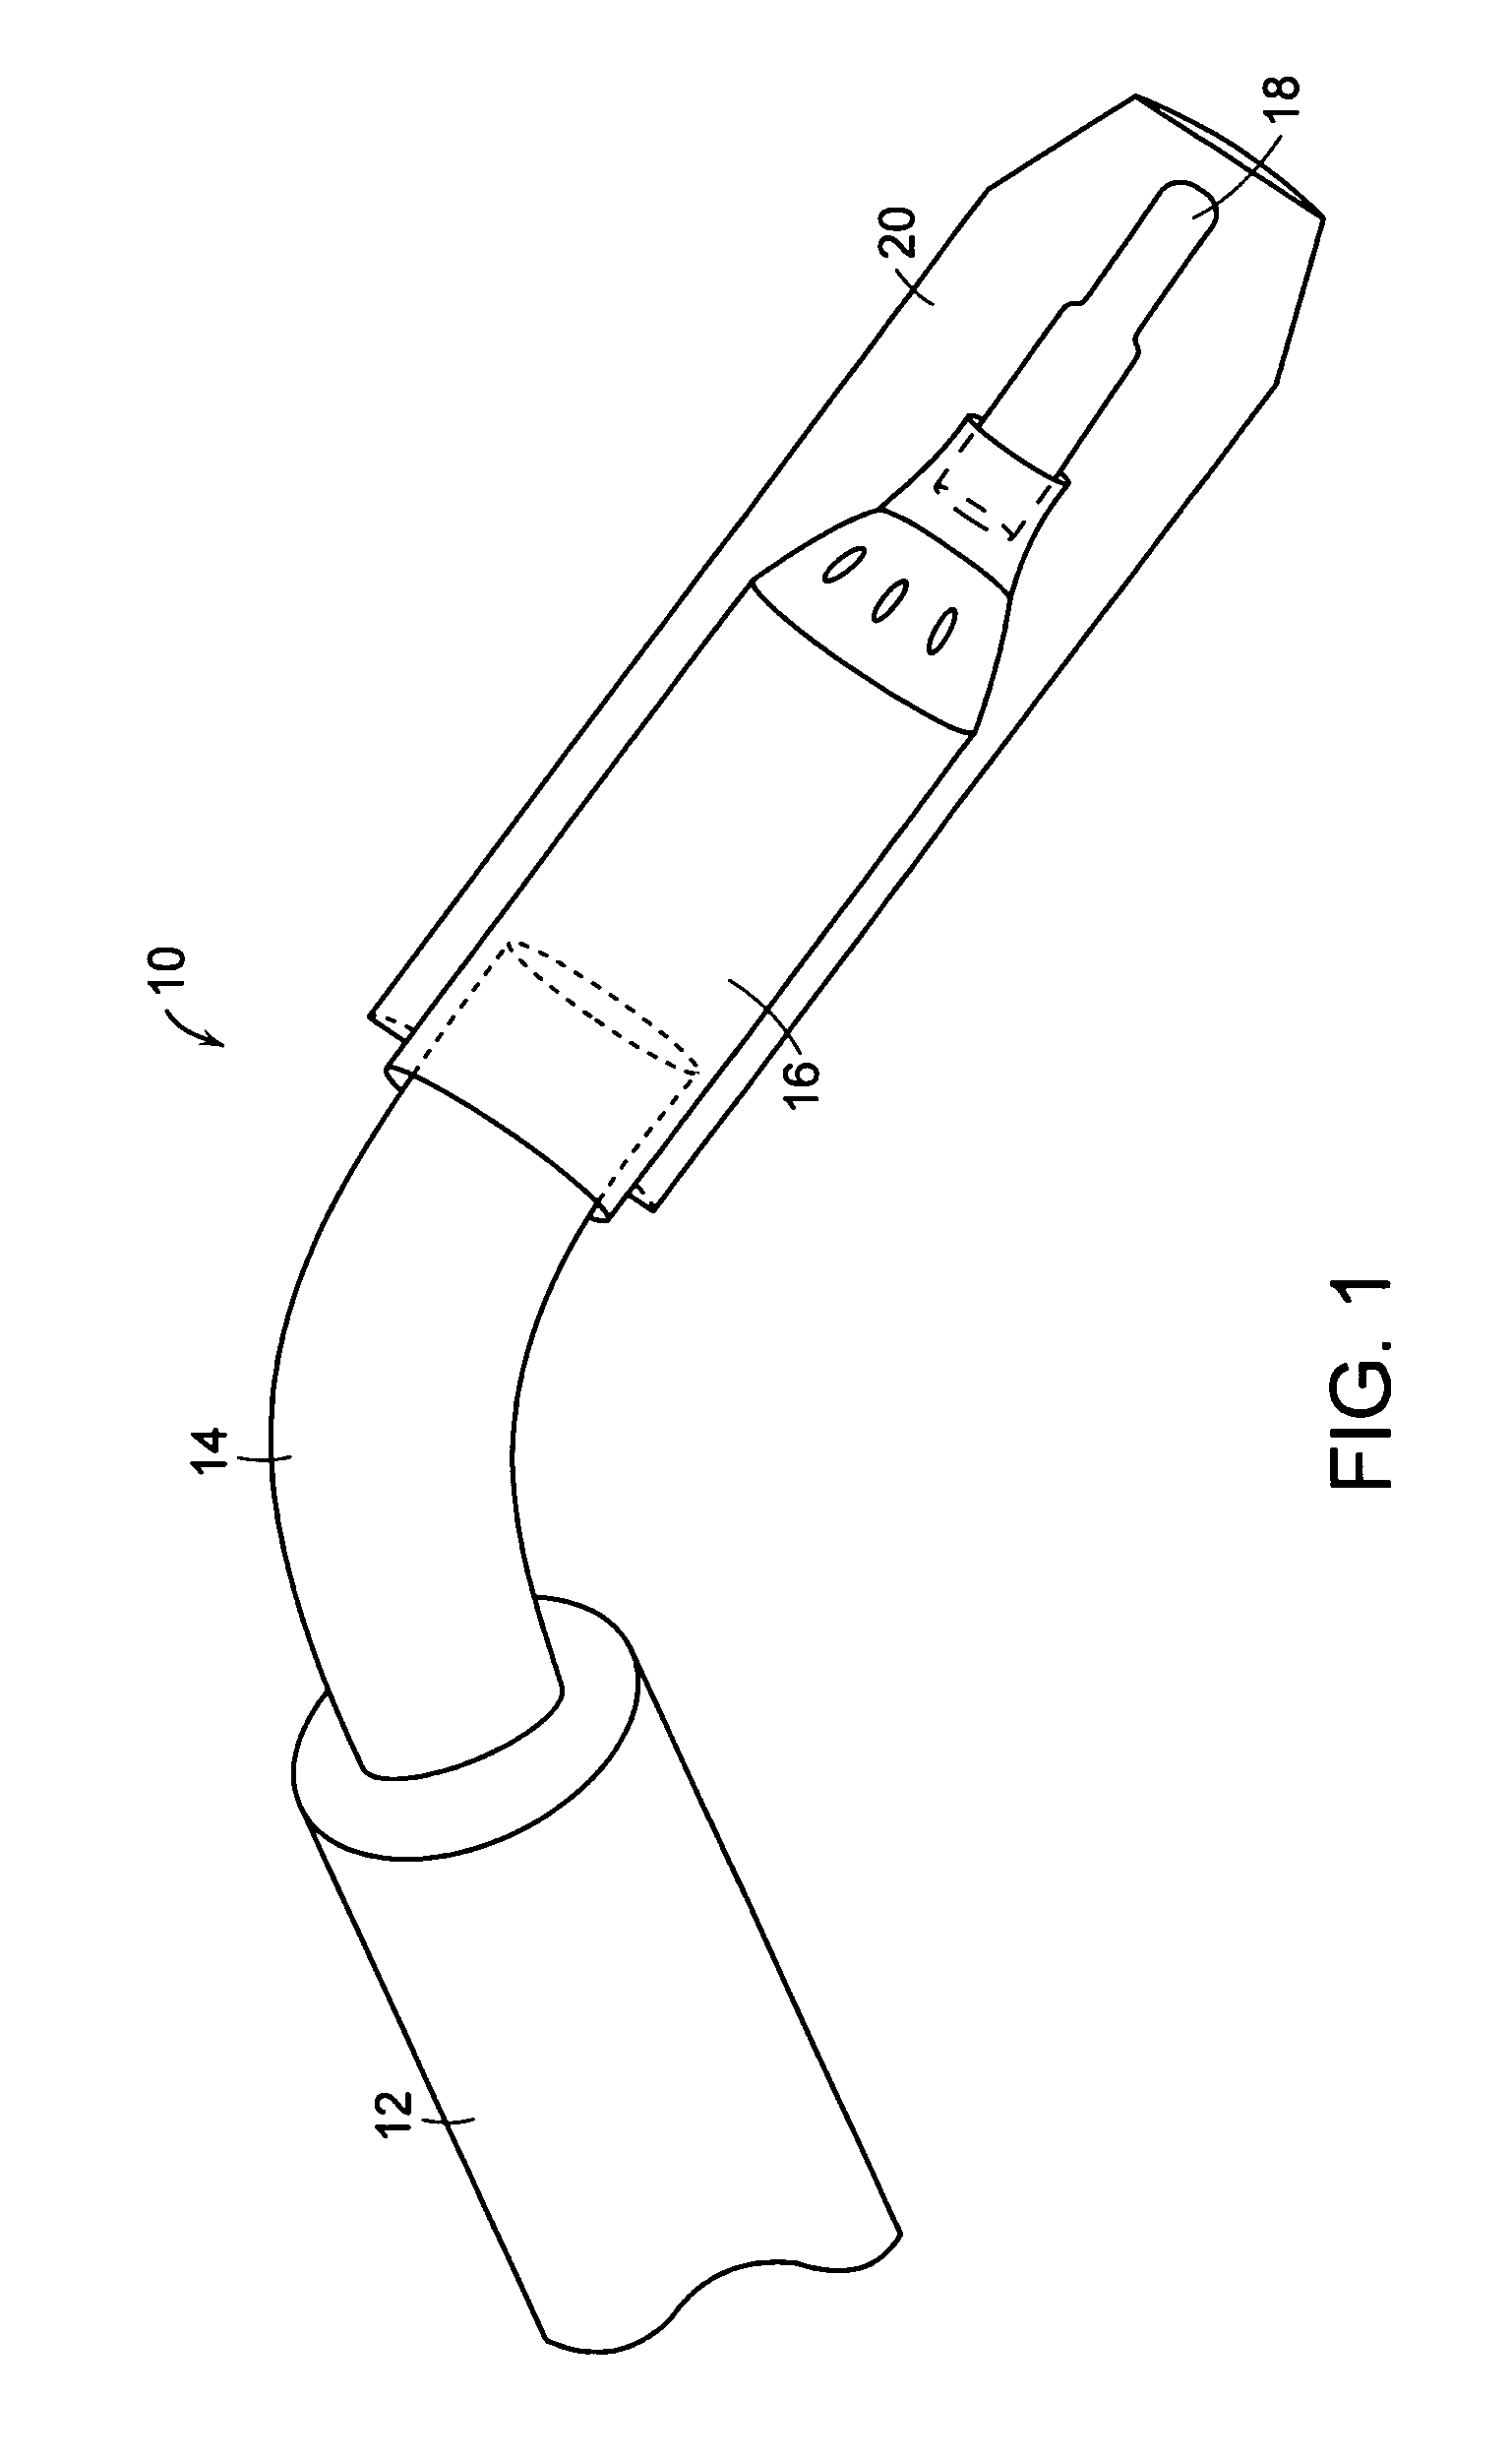 Taper locking features between components of a welding device